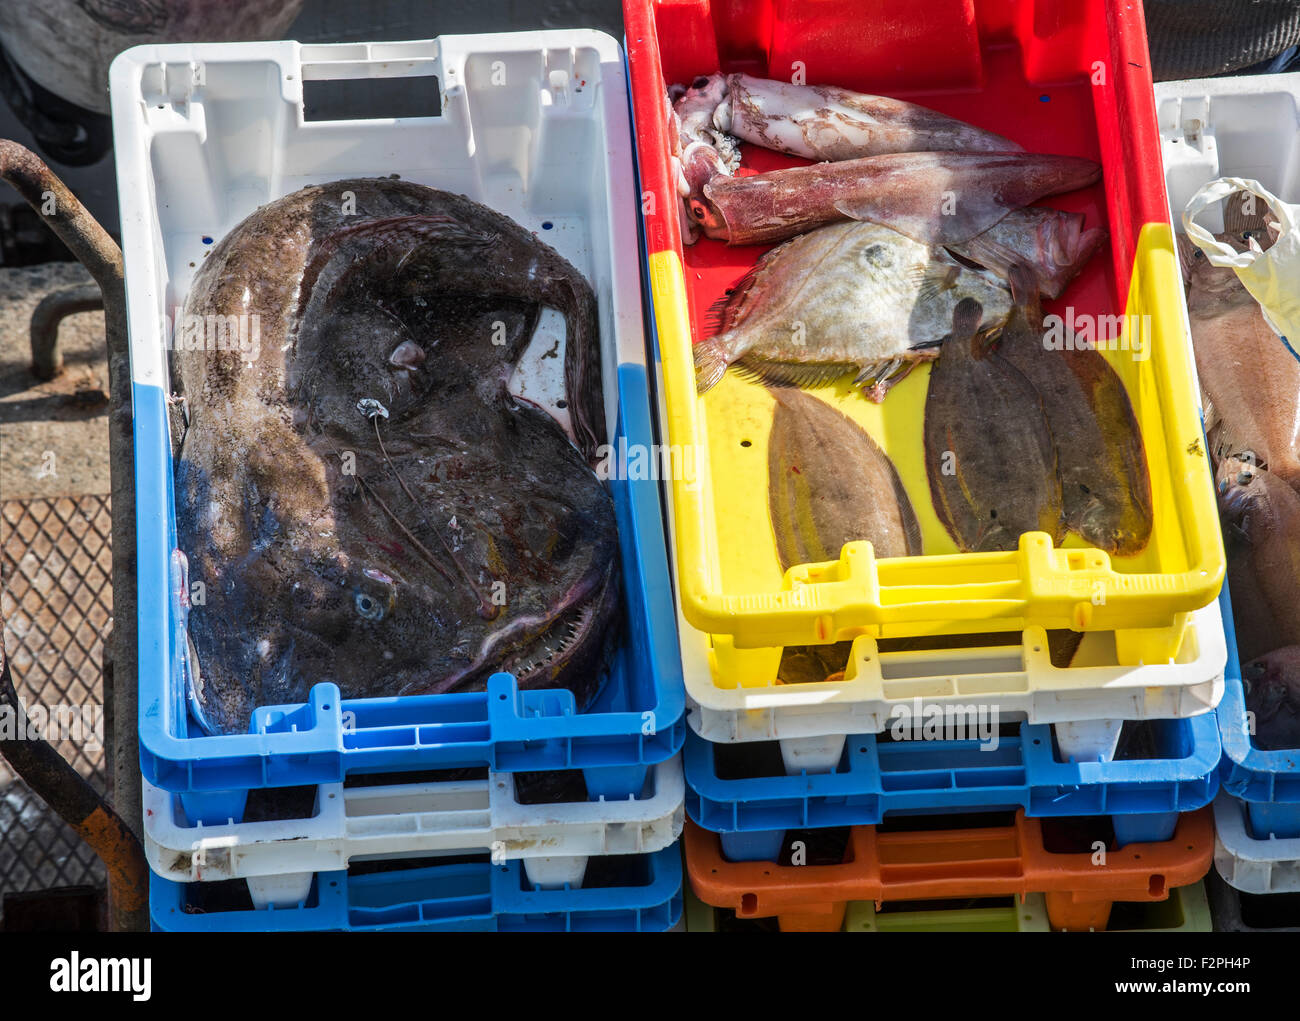 Plastic trays with catch from trawler fishing boat showing angler fish, squid and flatfish on quay of auction market in harbour Stock Photo